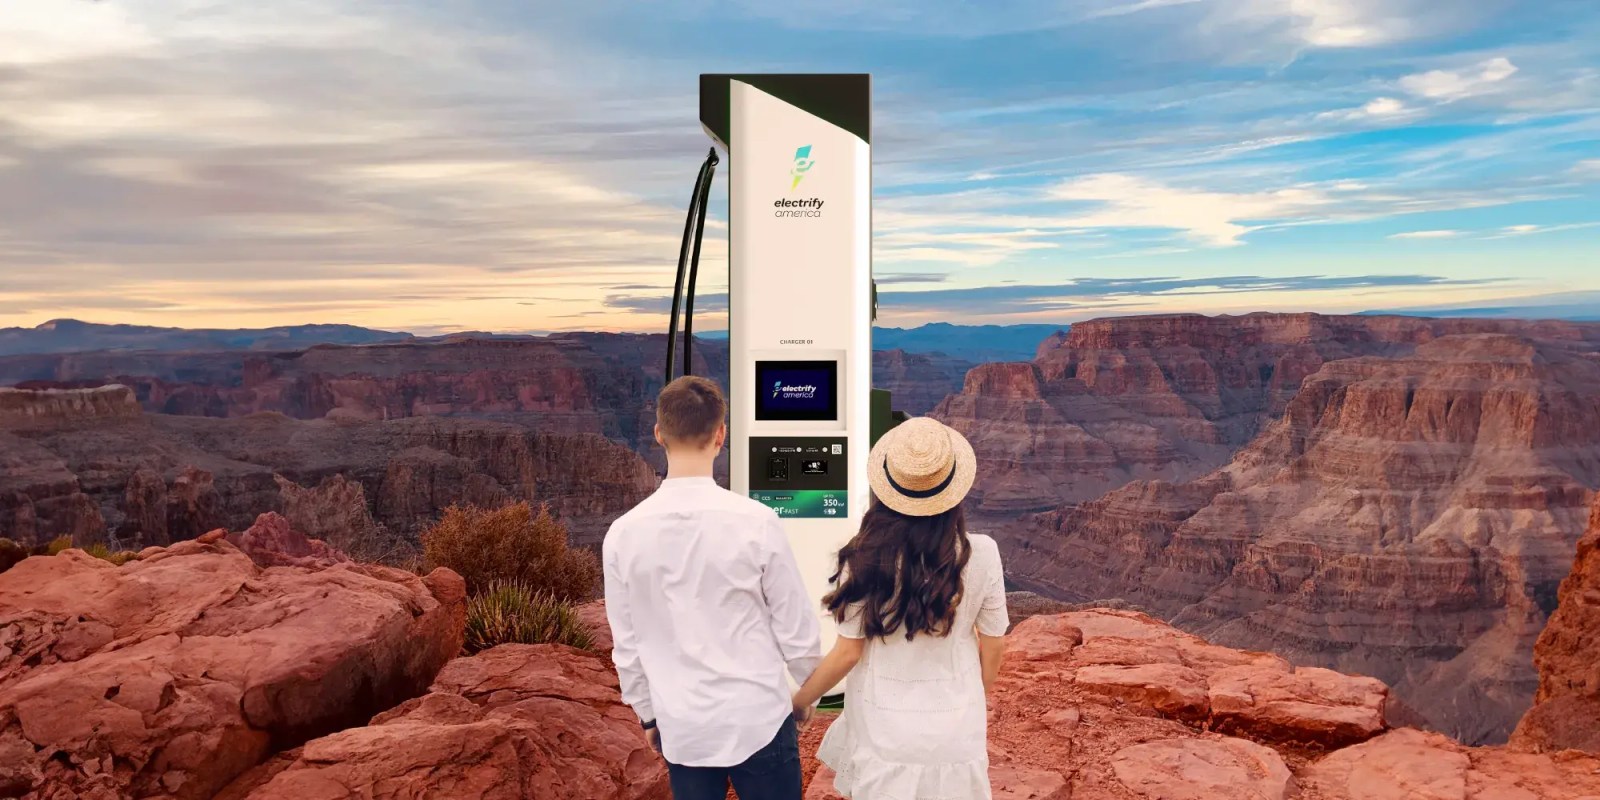 Grand Canyon DC fast chargers